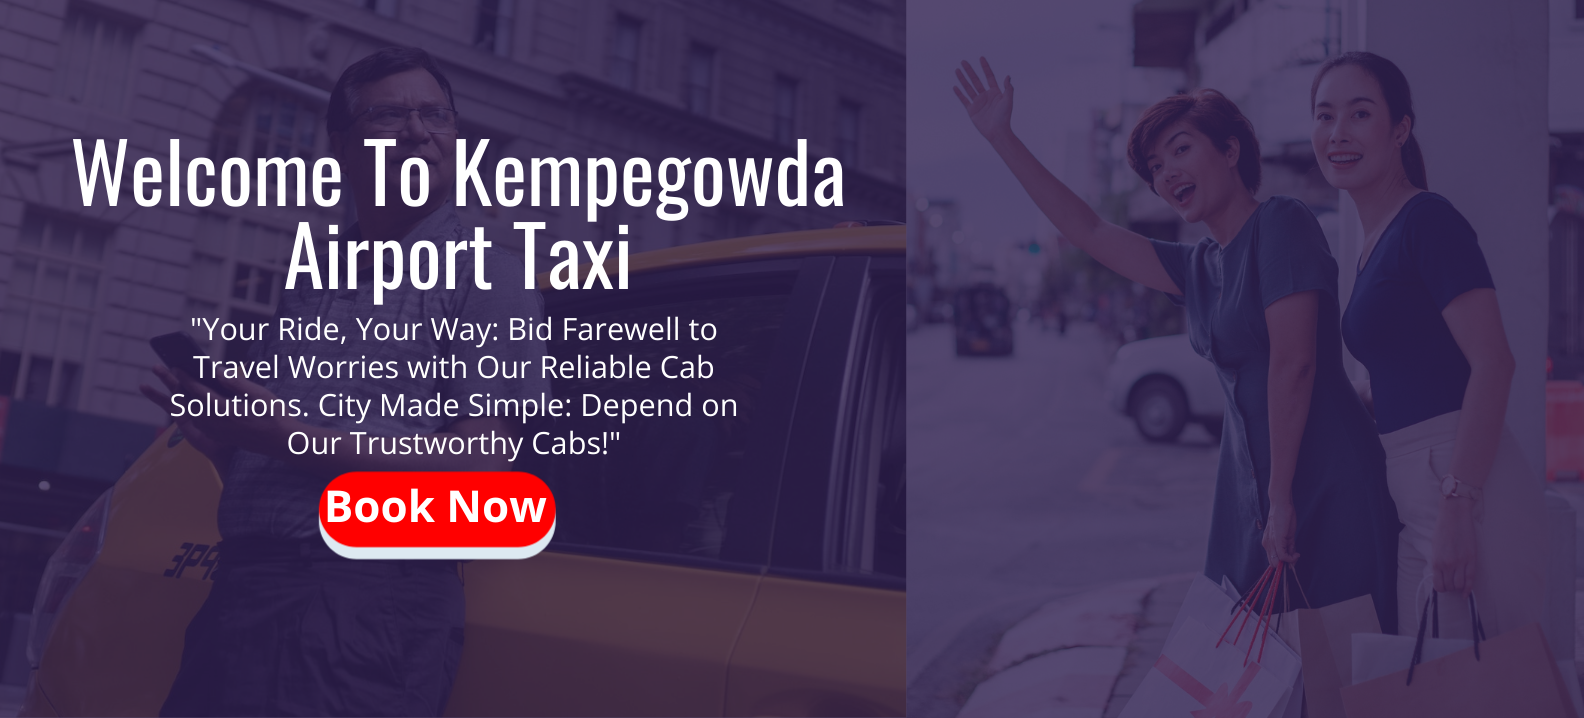 Kempegowda Airport Taxi